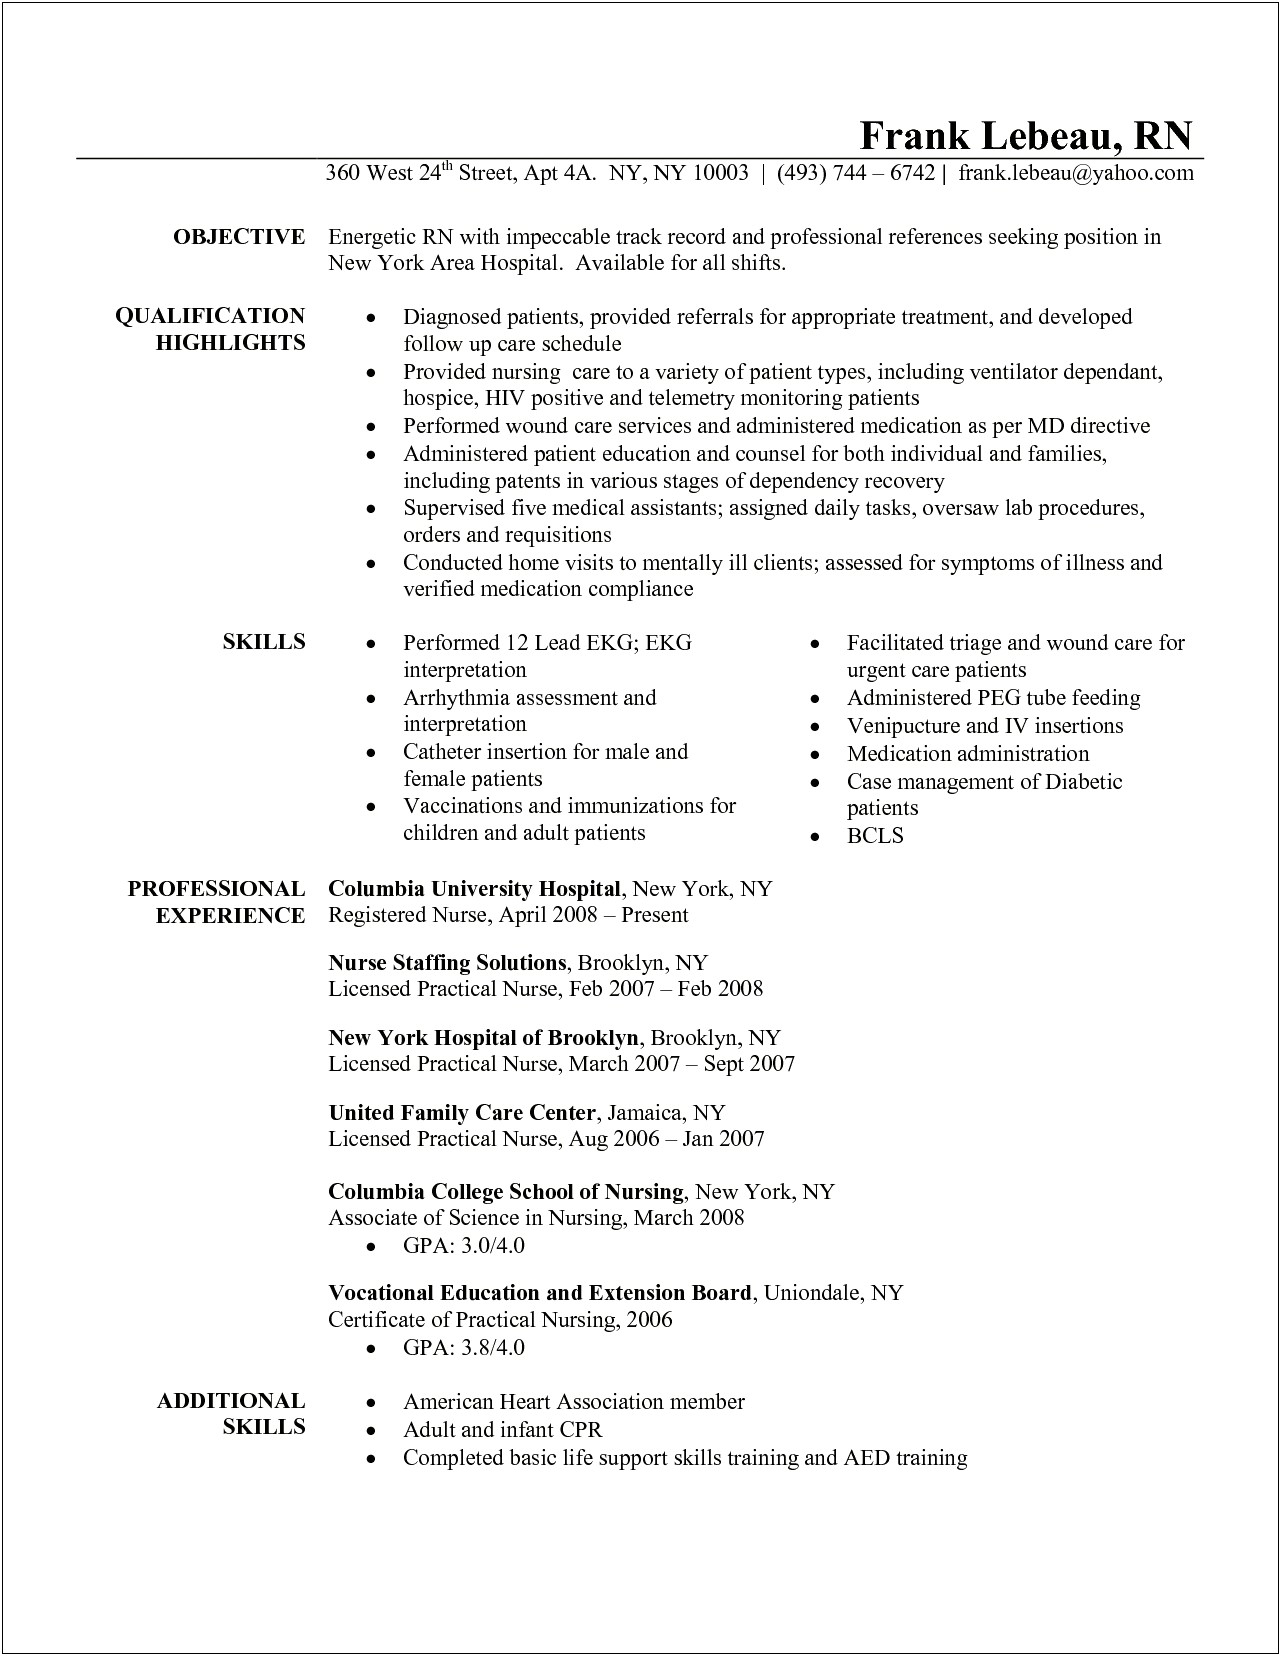 Resume For New Grad Nurse With No Experience